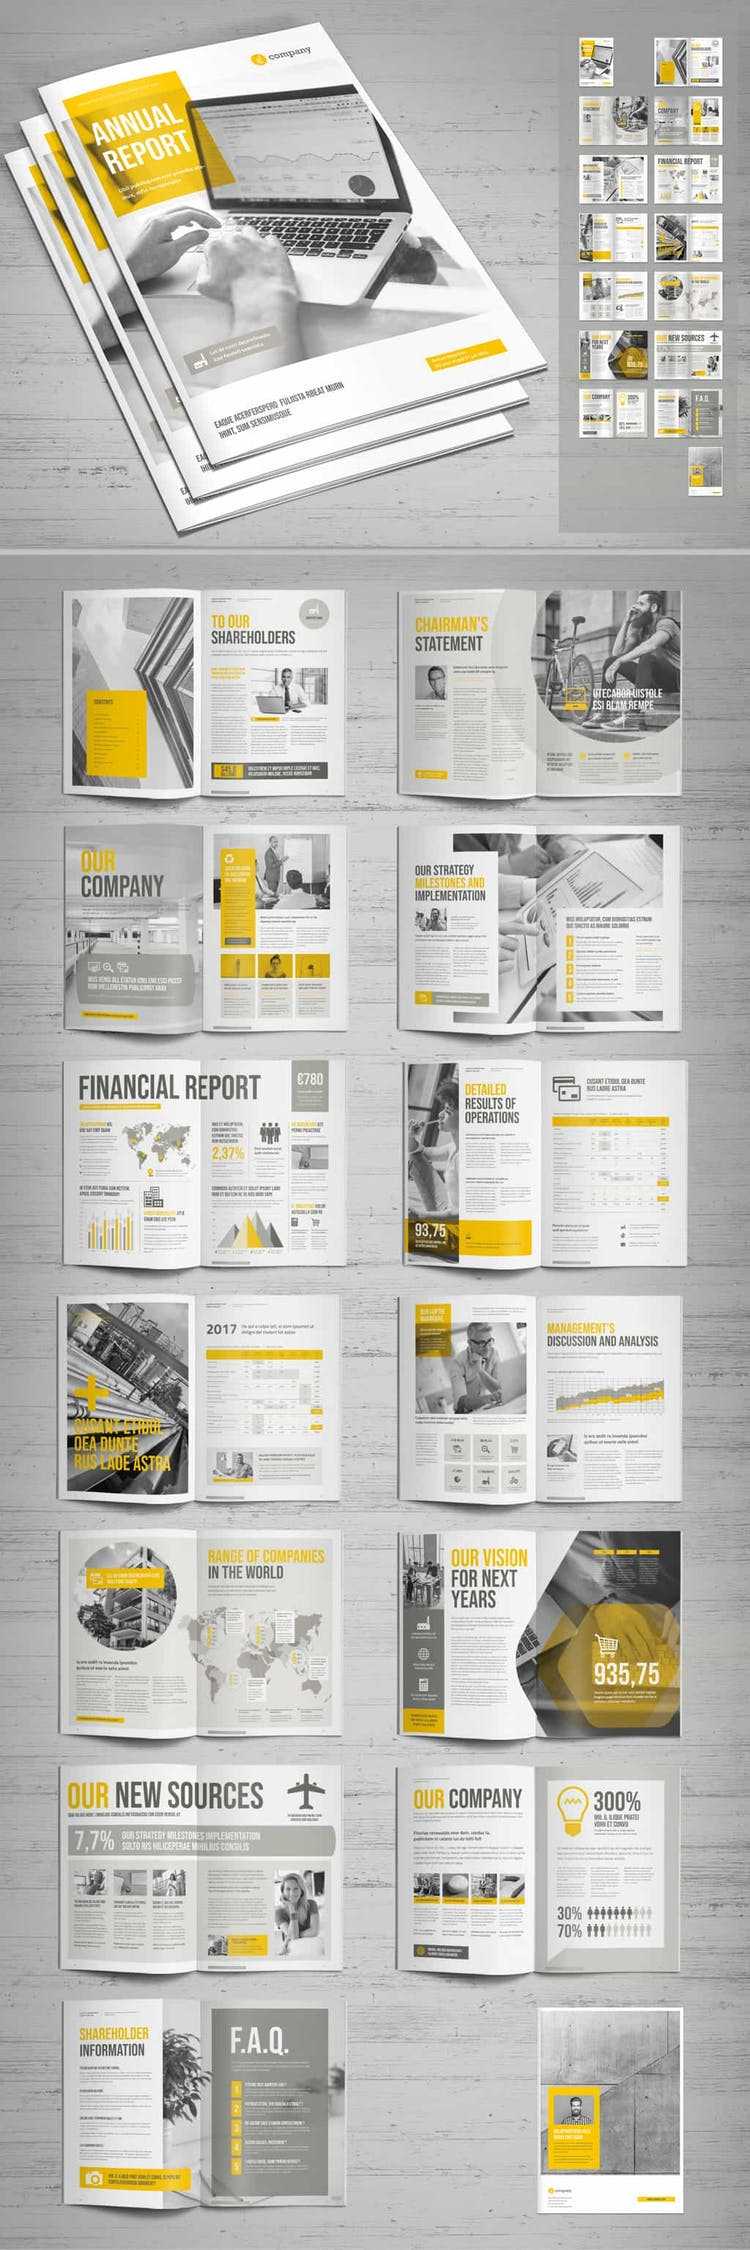 60 Best Annual Report Design Templates In Chairman's Annual Report Template